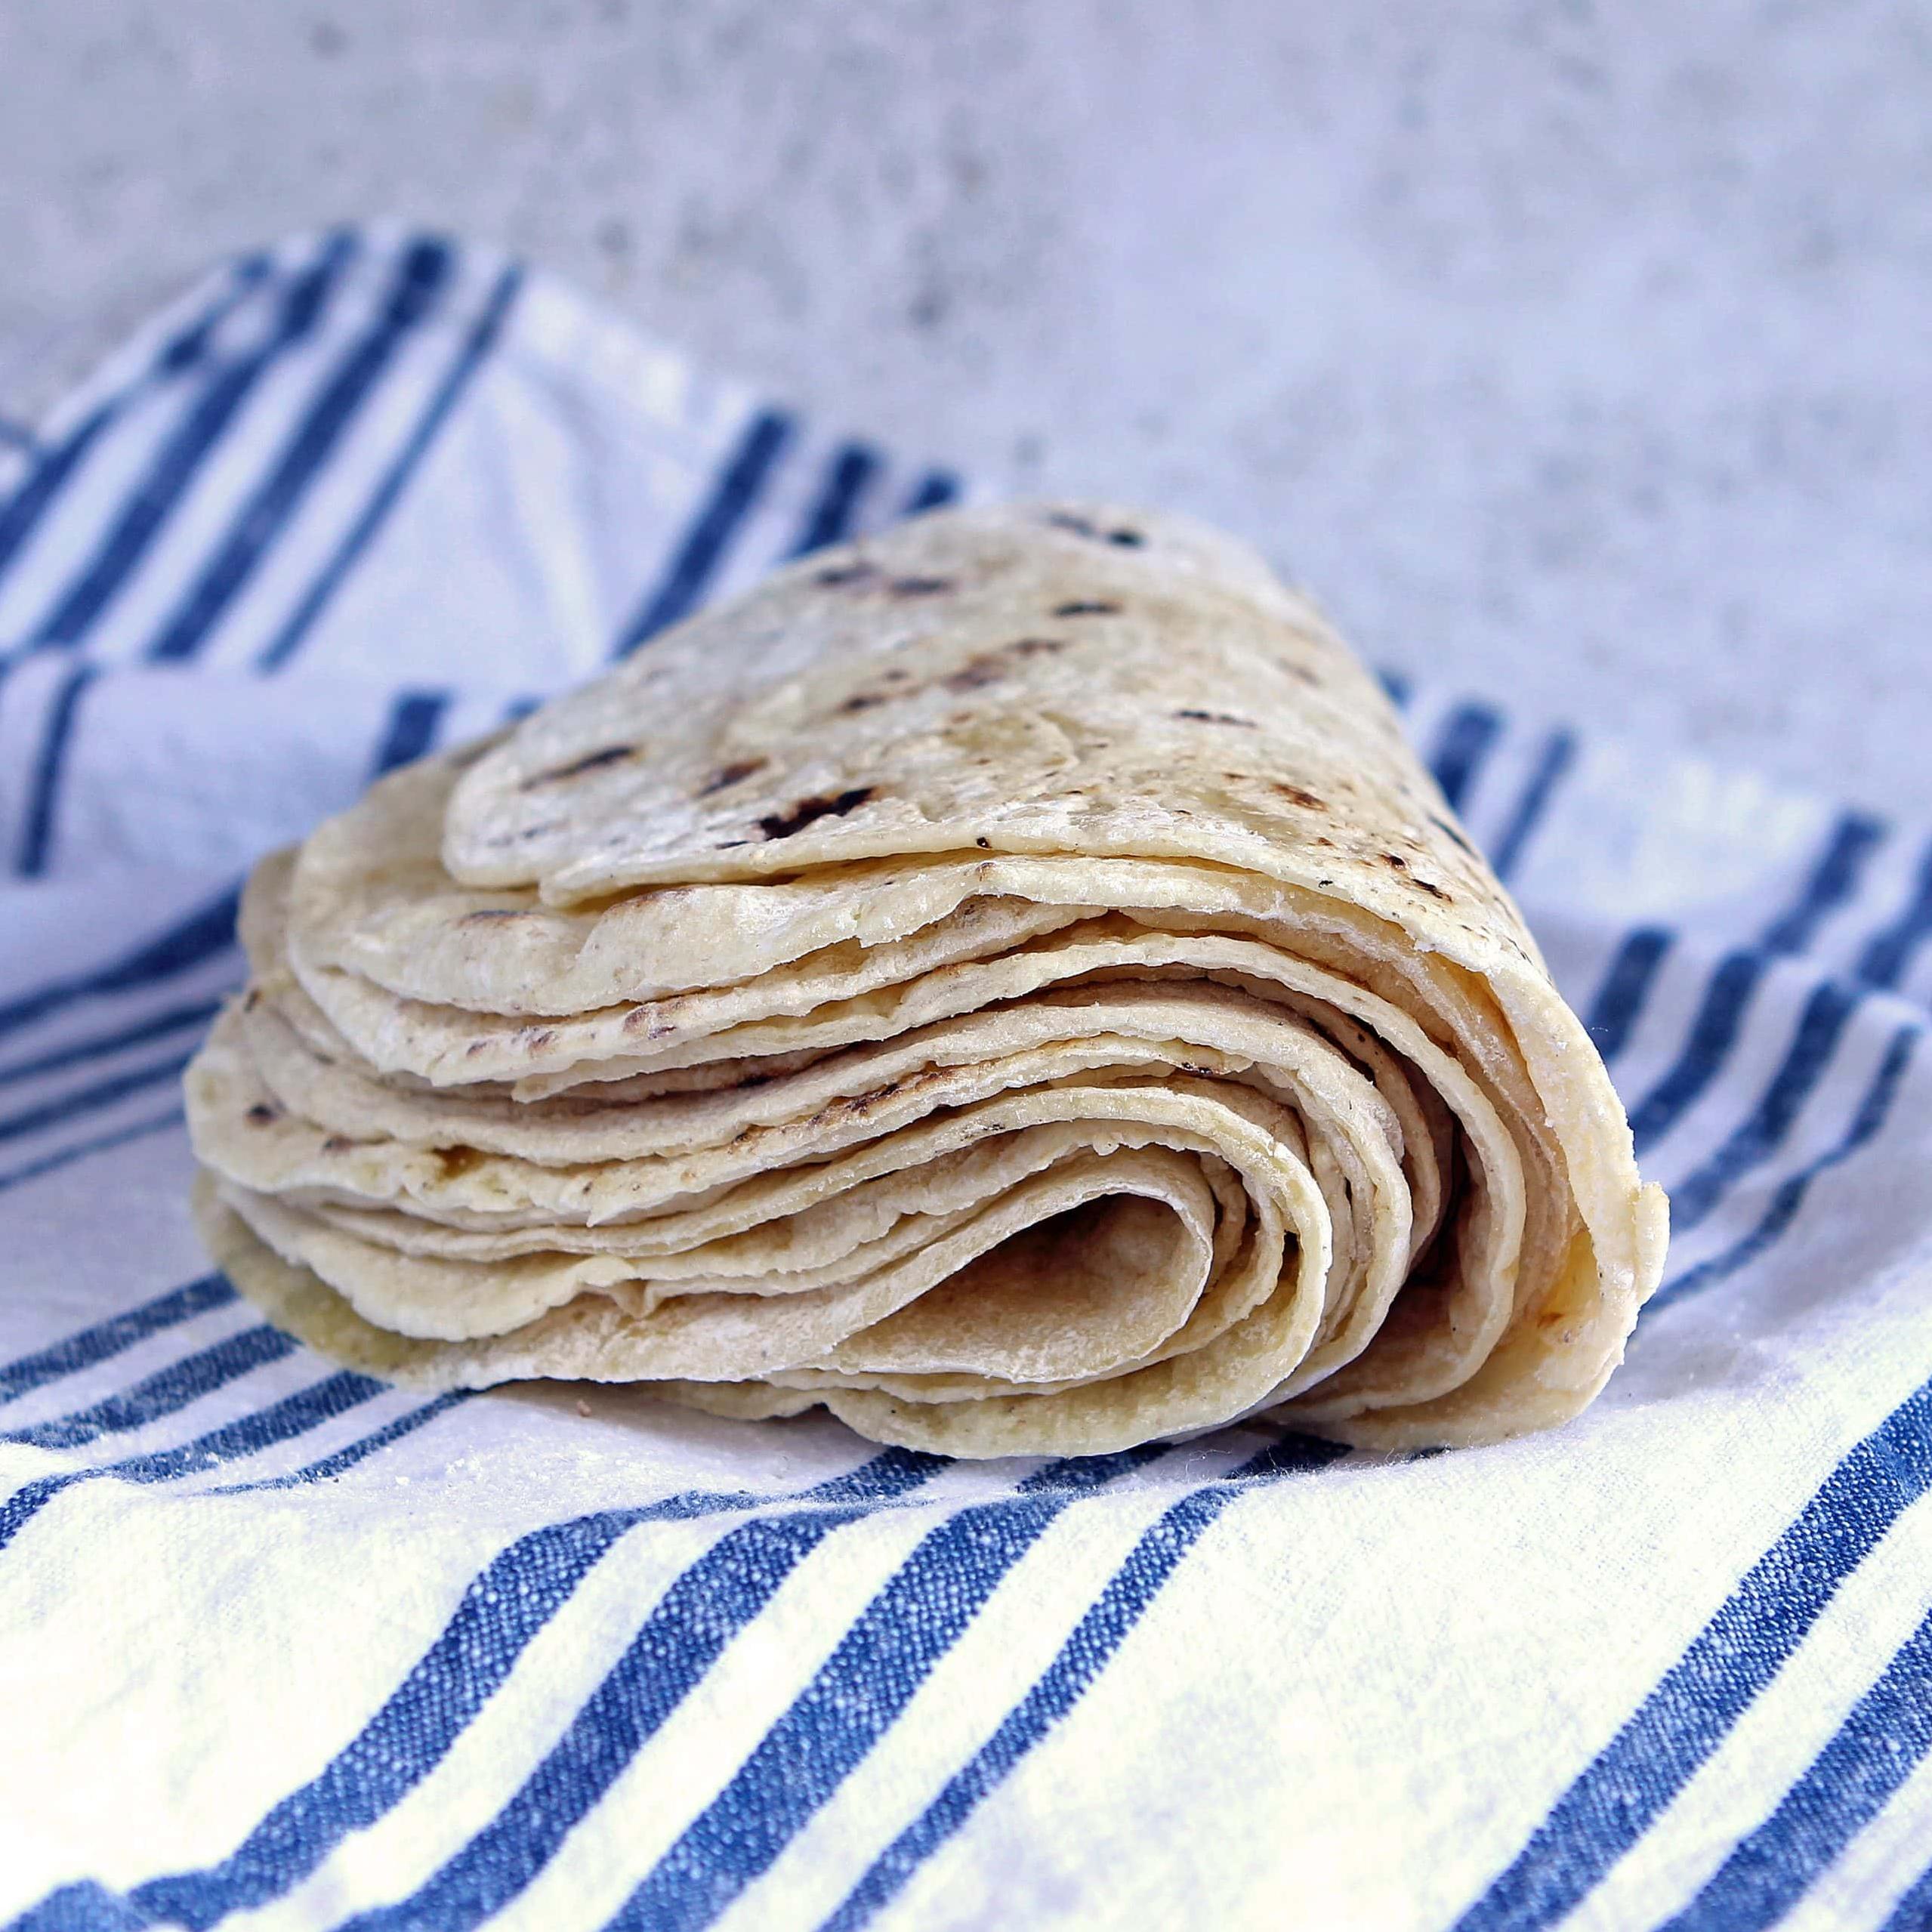  These gluten-free tortillas are perfect for those who have celiac disease or gluten intolerance.